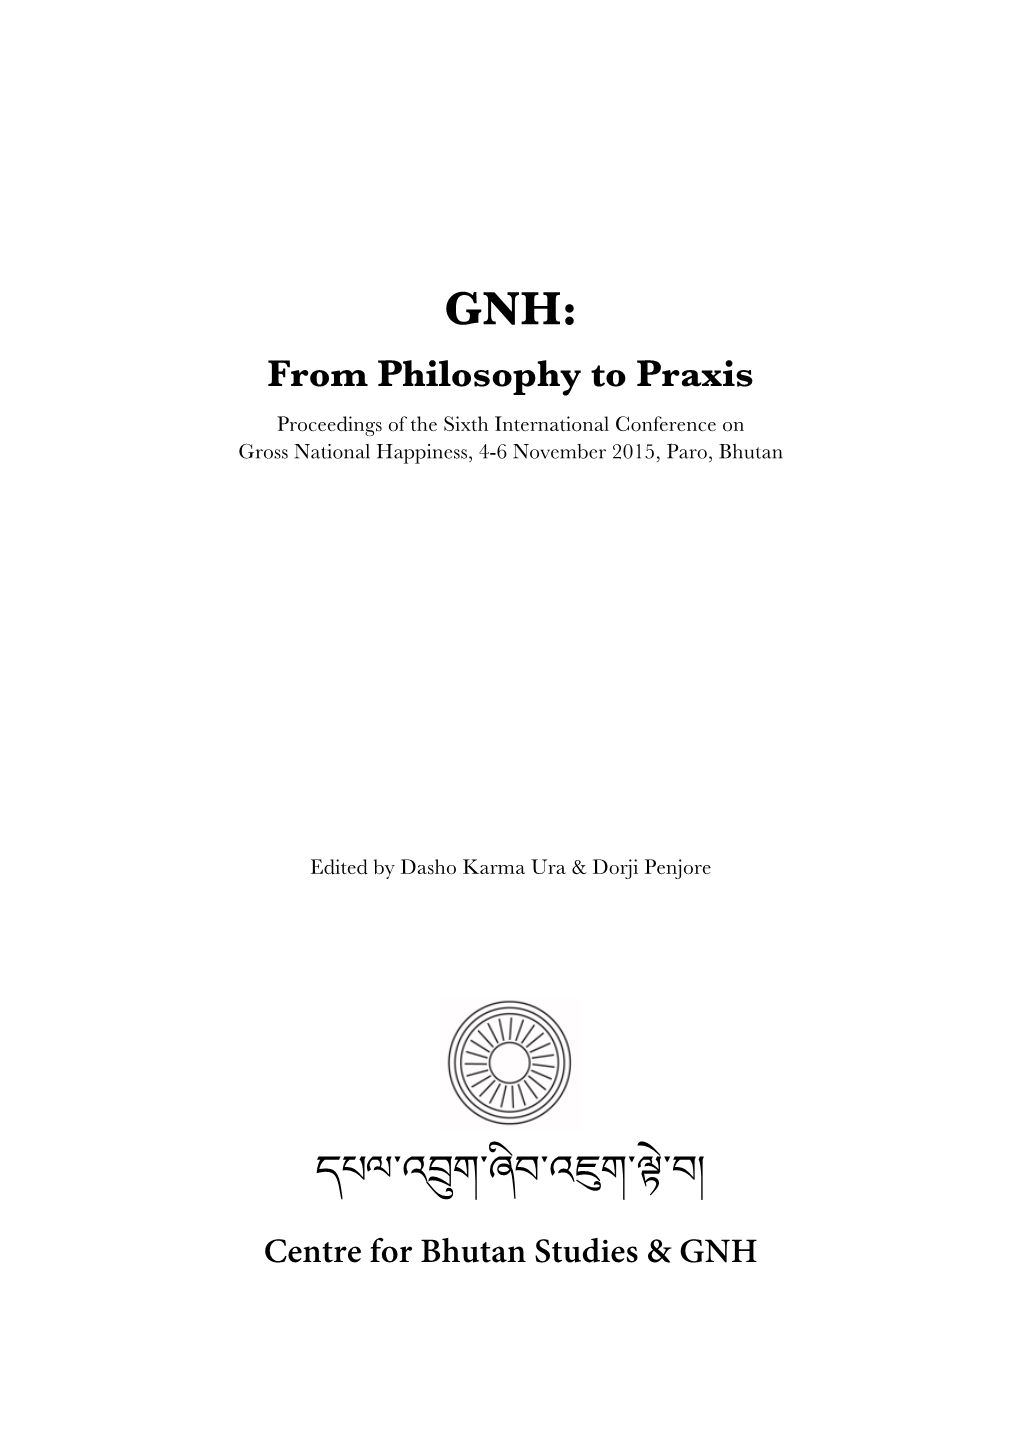 GNH: from Philosophy to Praxis Proceedings of the Sixth International Conference on Gross National Happiness, 4-6 November 2015, Paro, Bhutan